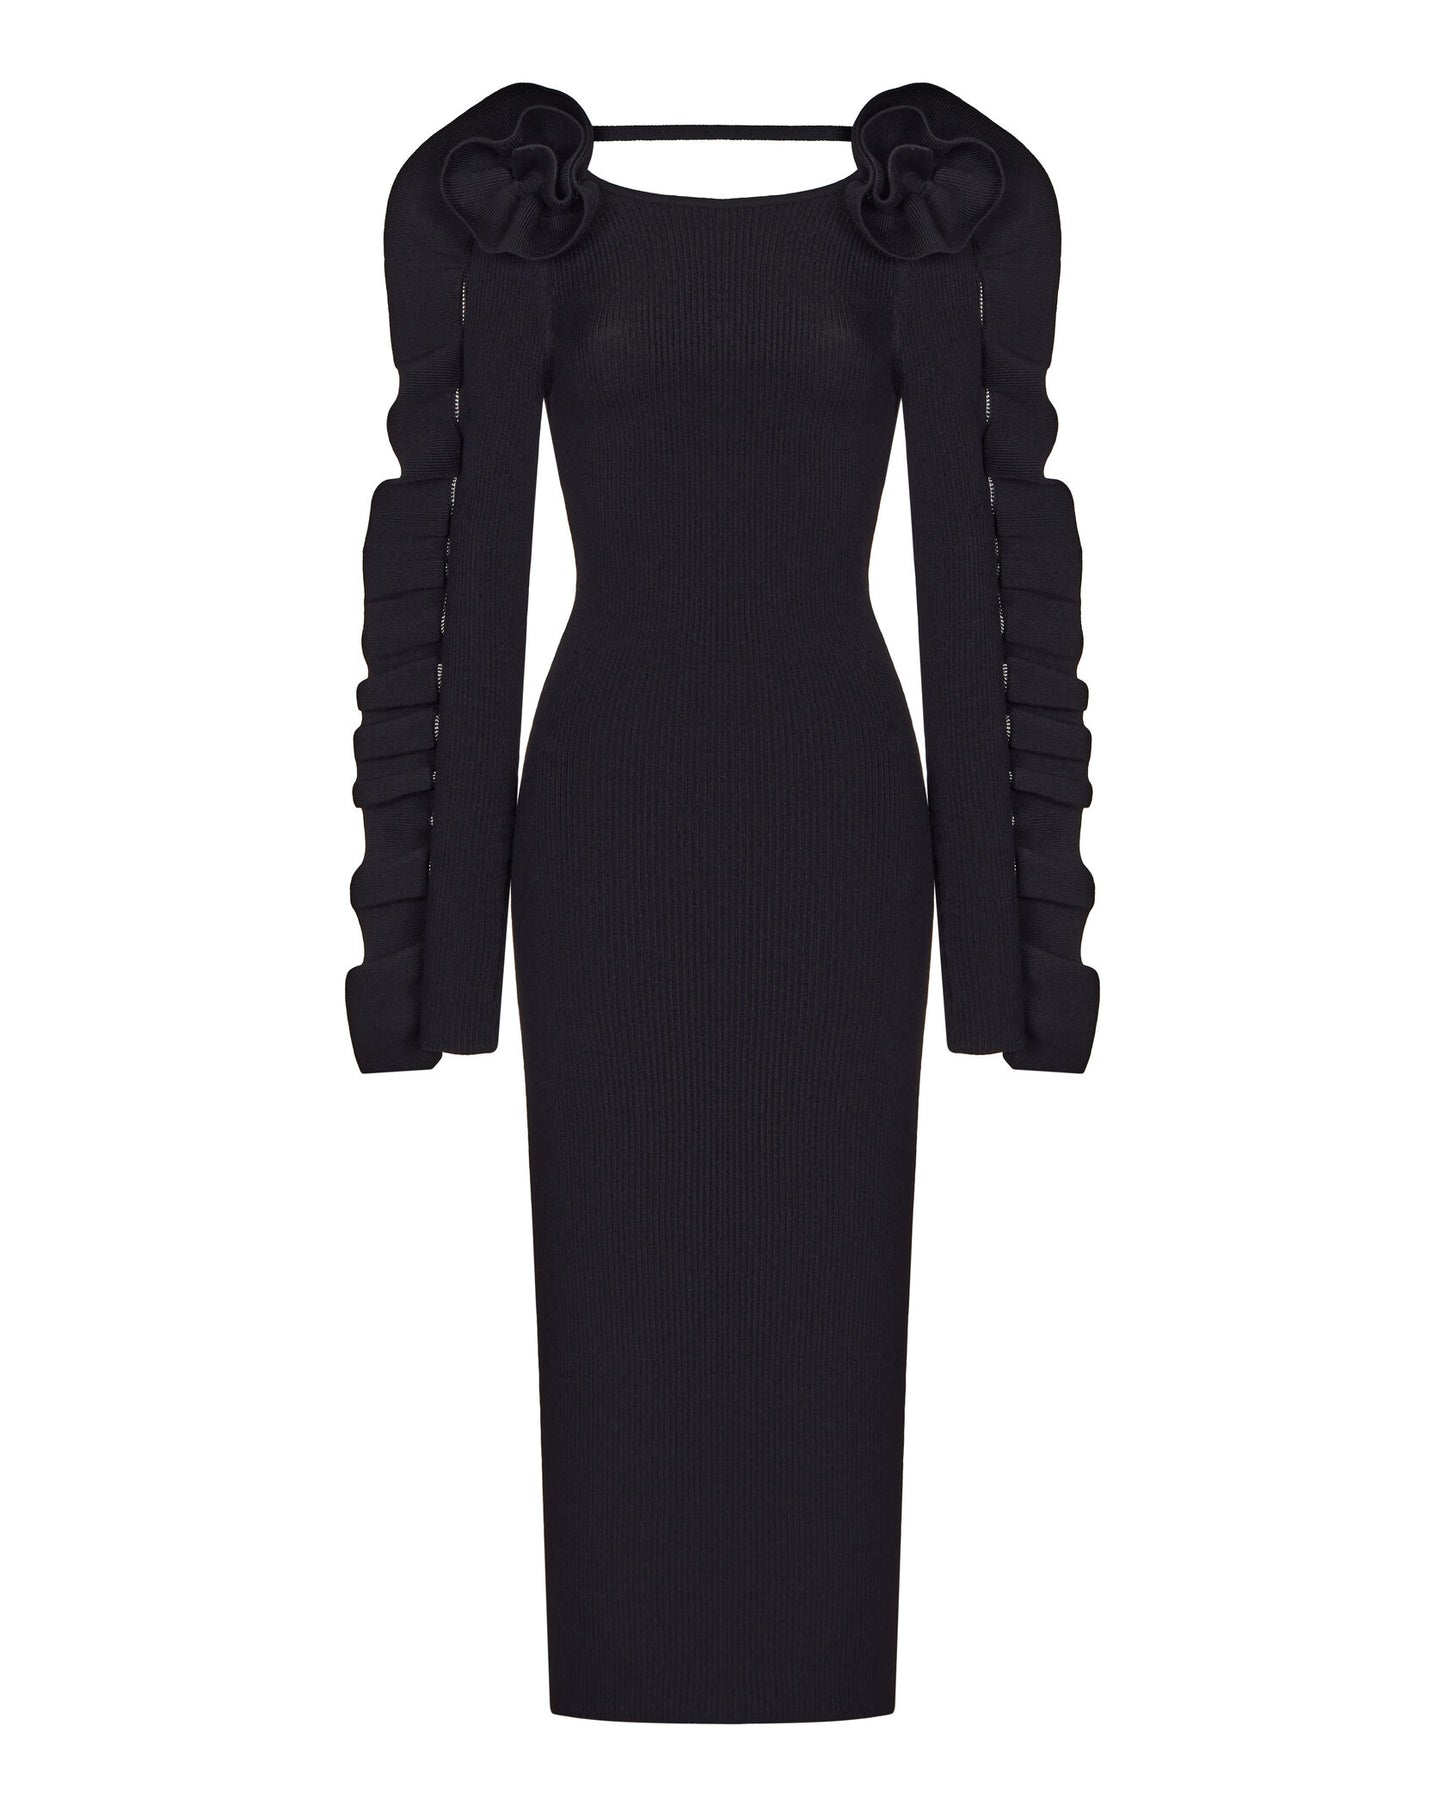 COUTURE KNITTED DRESS WITH ROUCHES ON SLEEVES